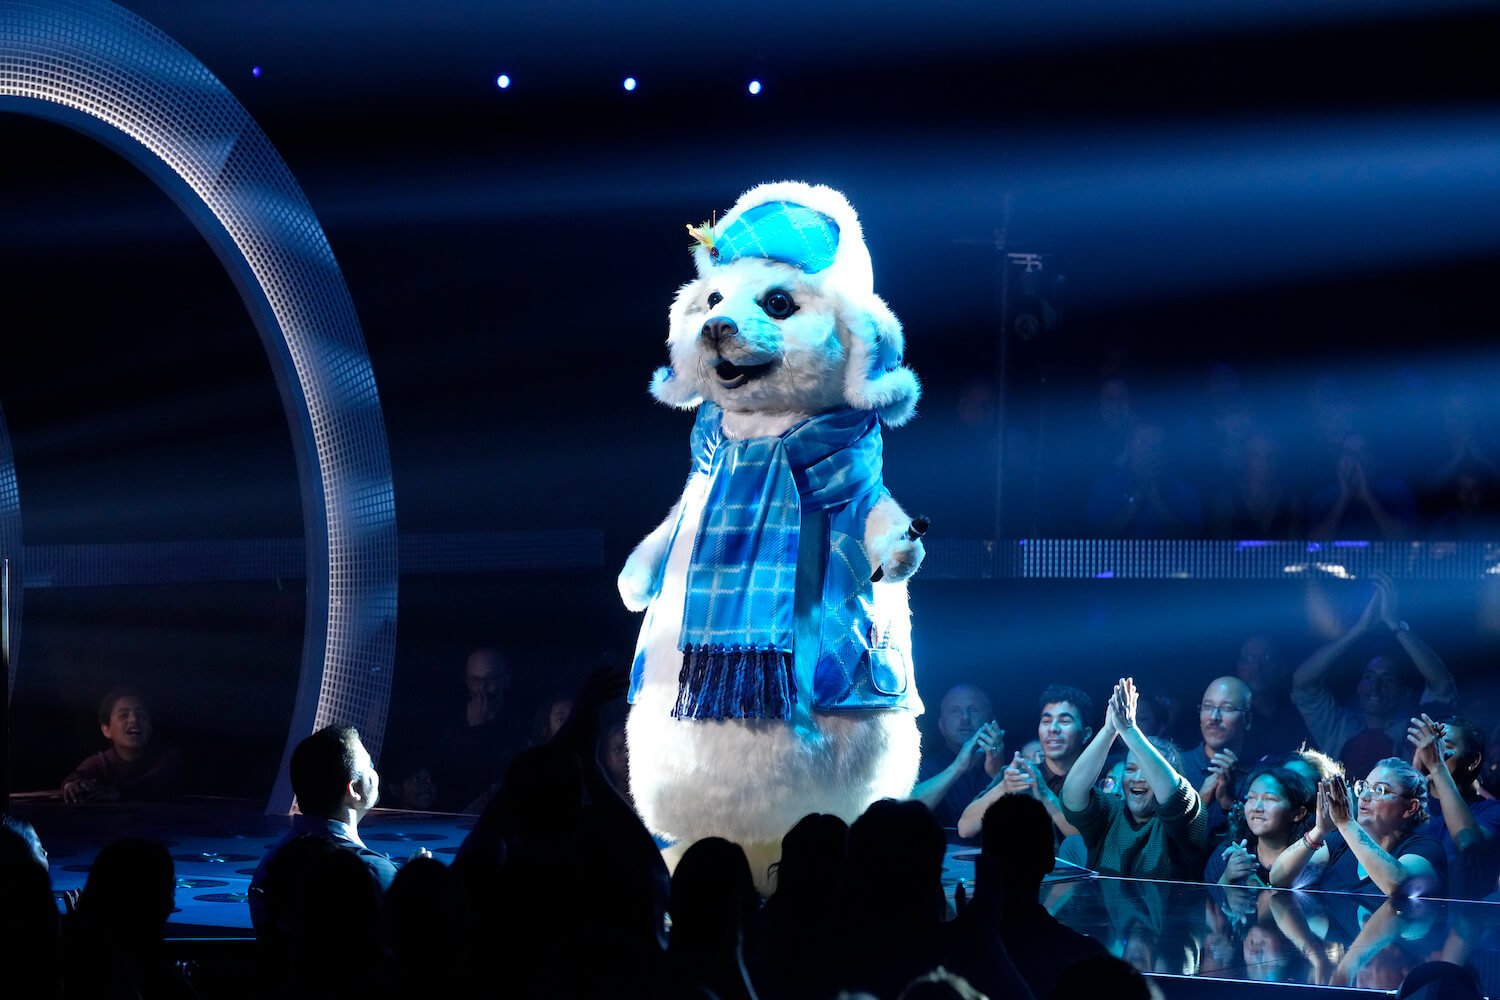 A man singing in a white seal costume against a dark background while surrounded by a sitting audience in 'The Masked Singer' Season 11